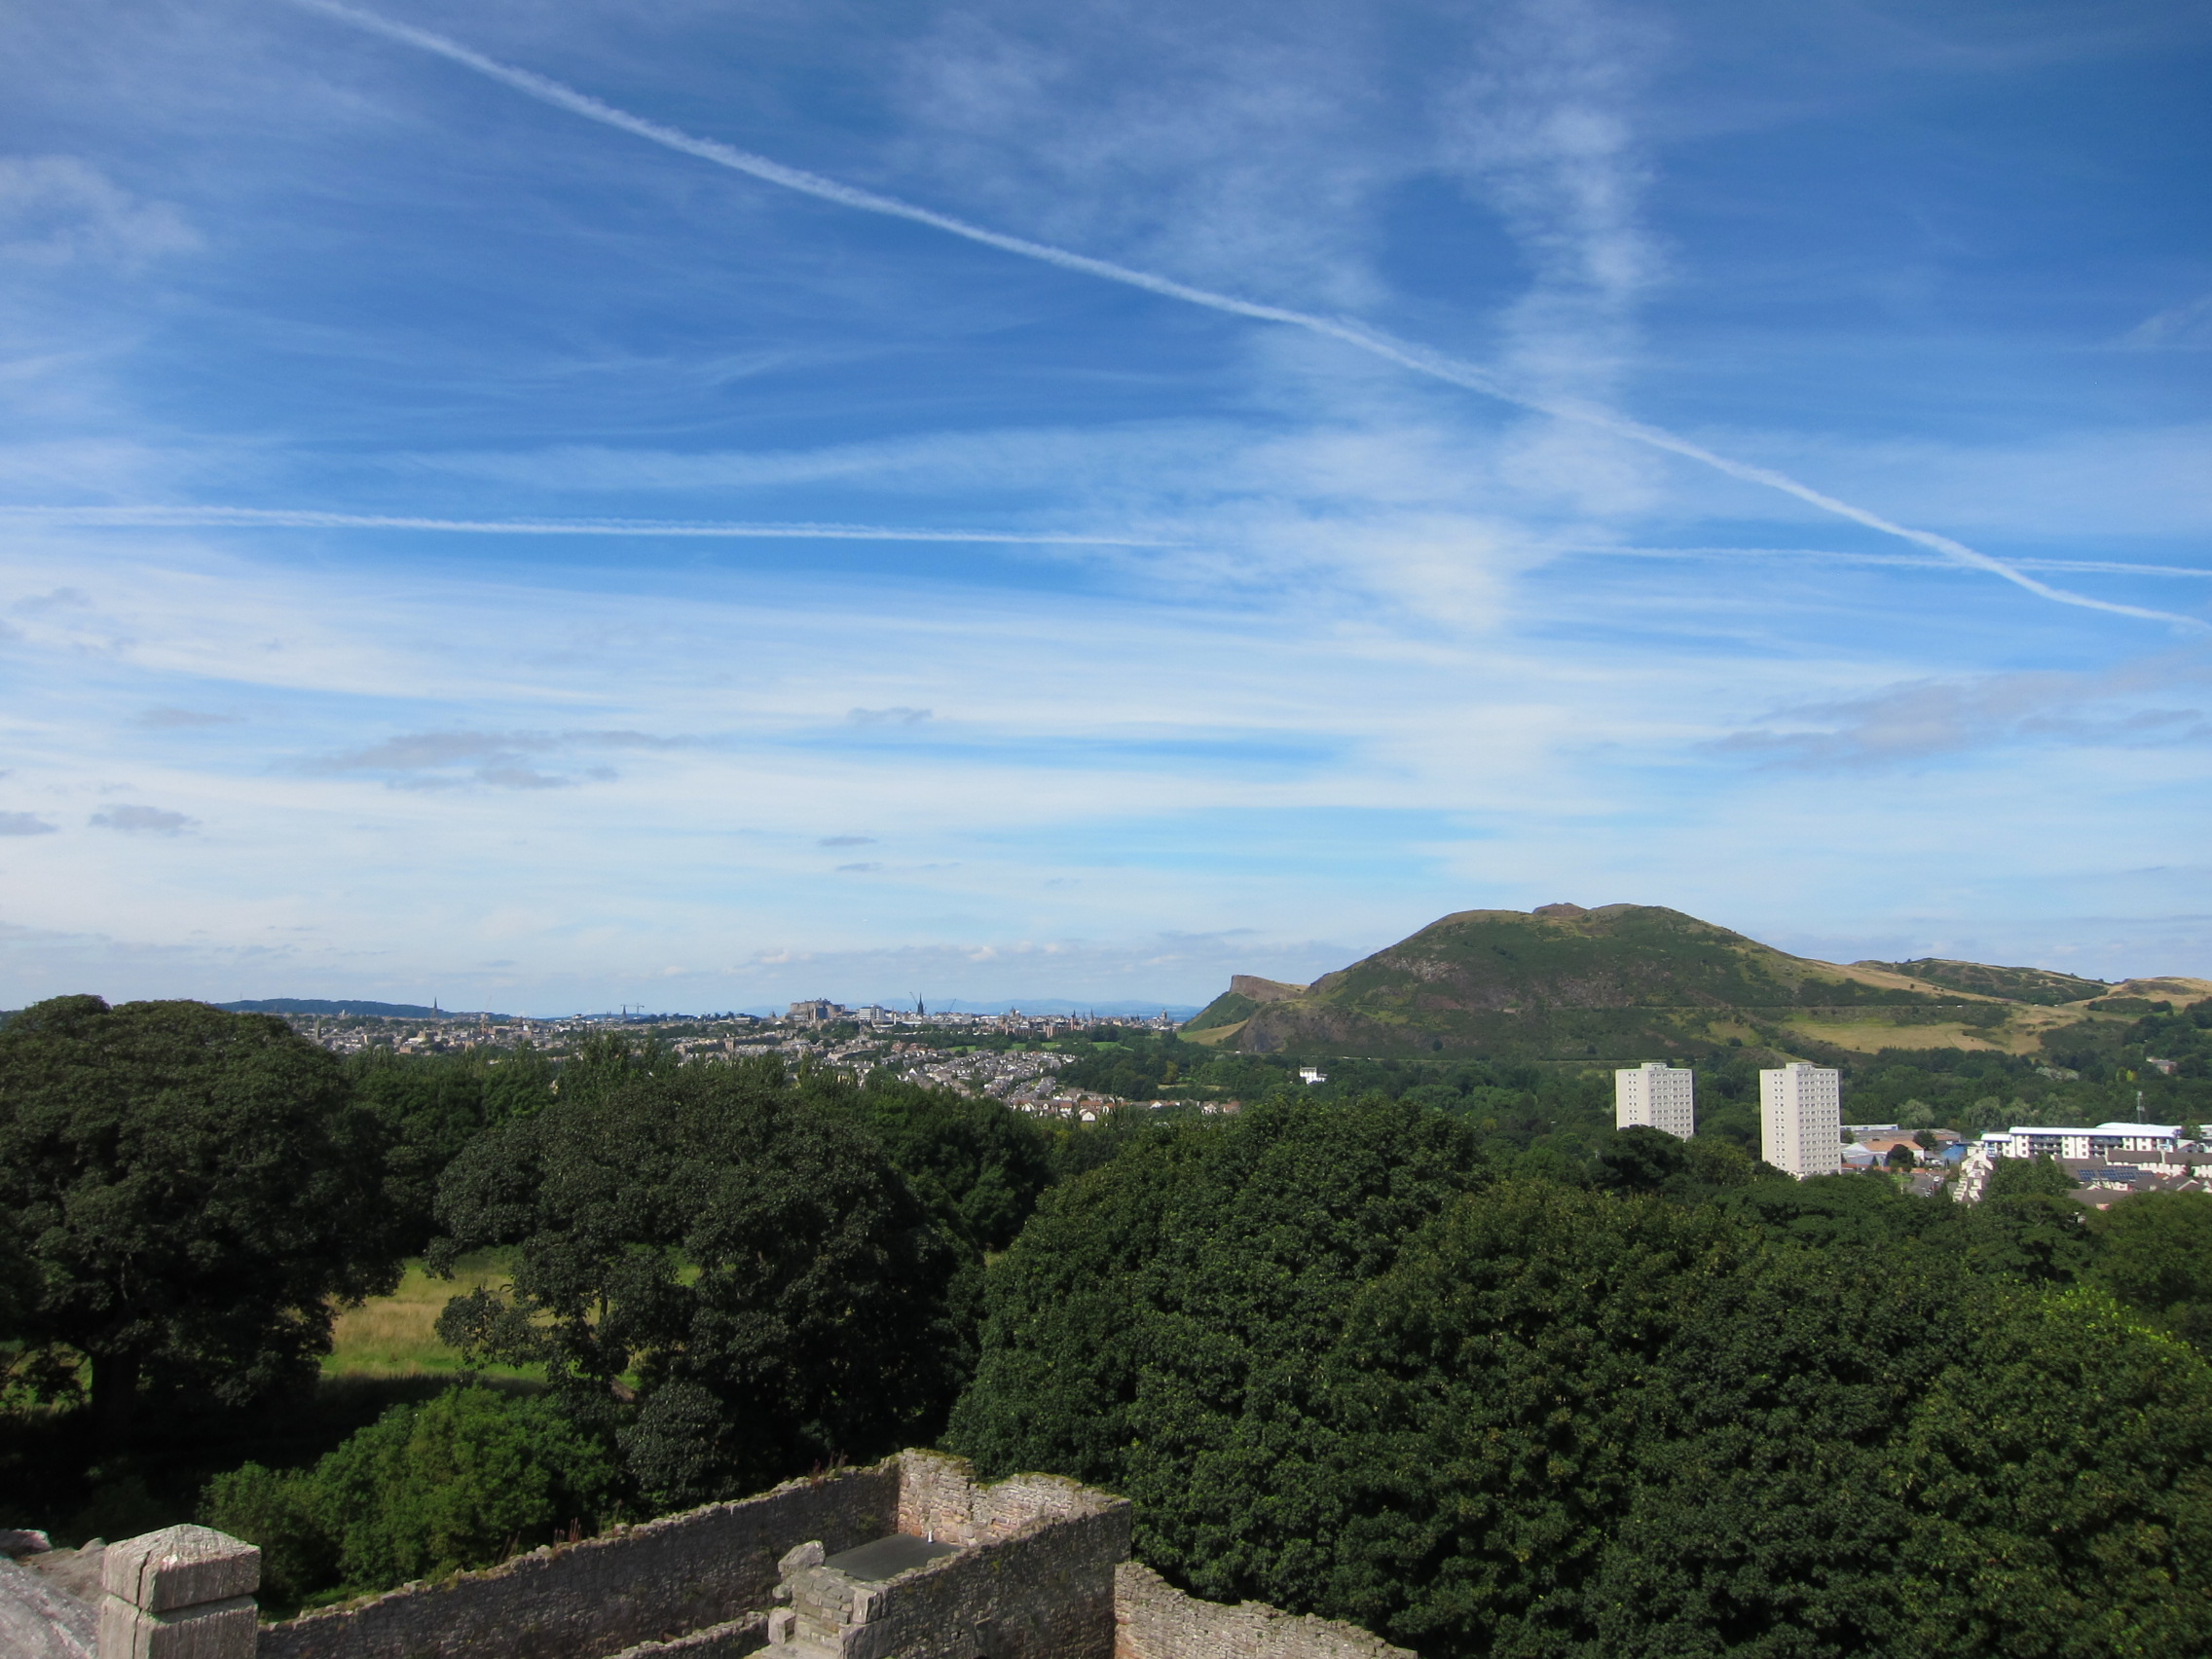 View from Craigmillar Castle